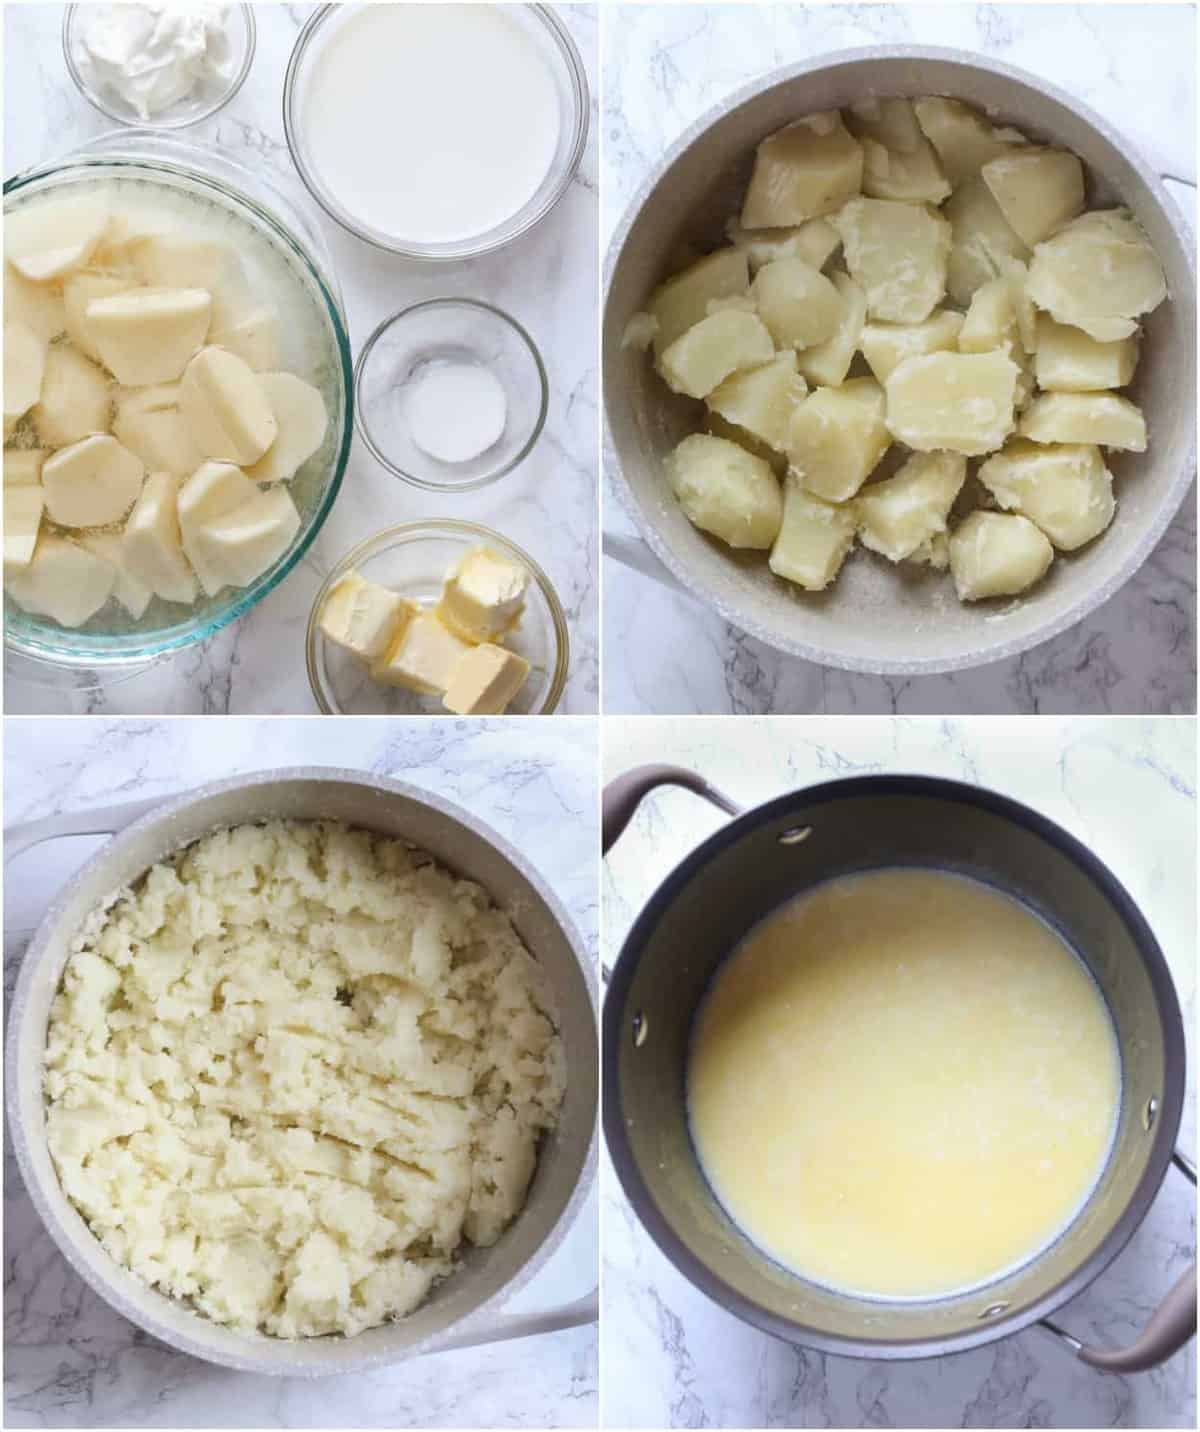 Step by step pictures of how to make mashed potatoes.